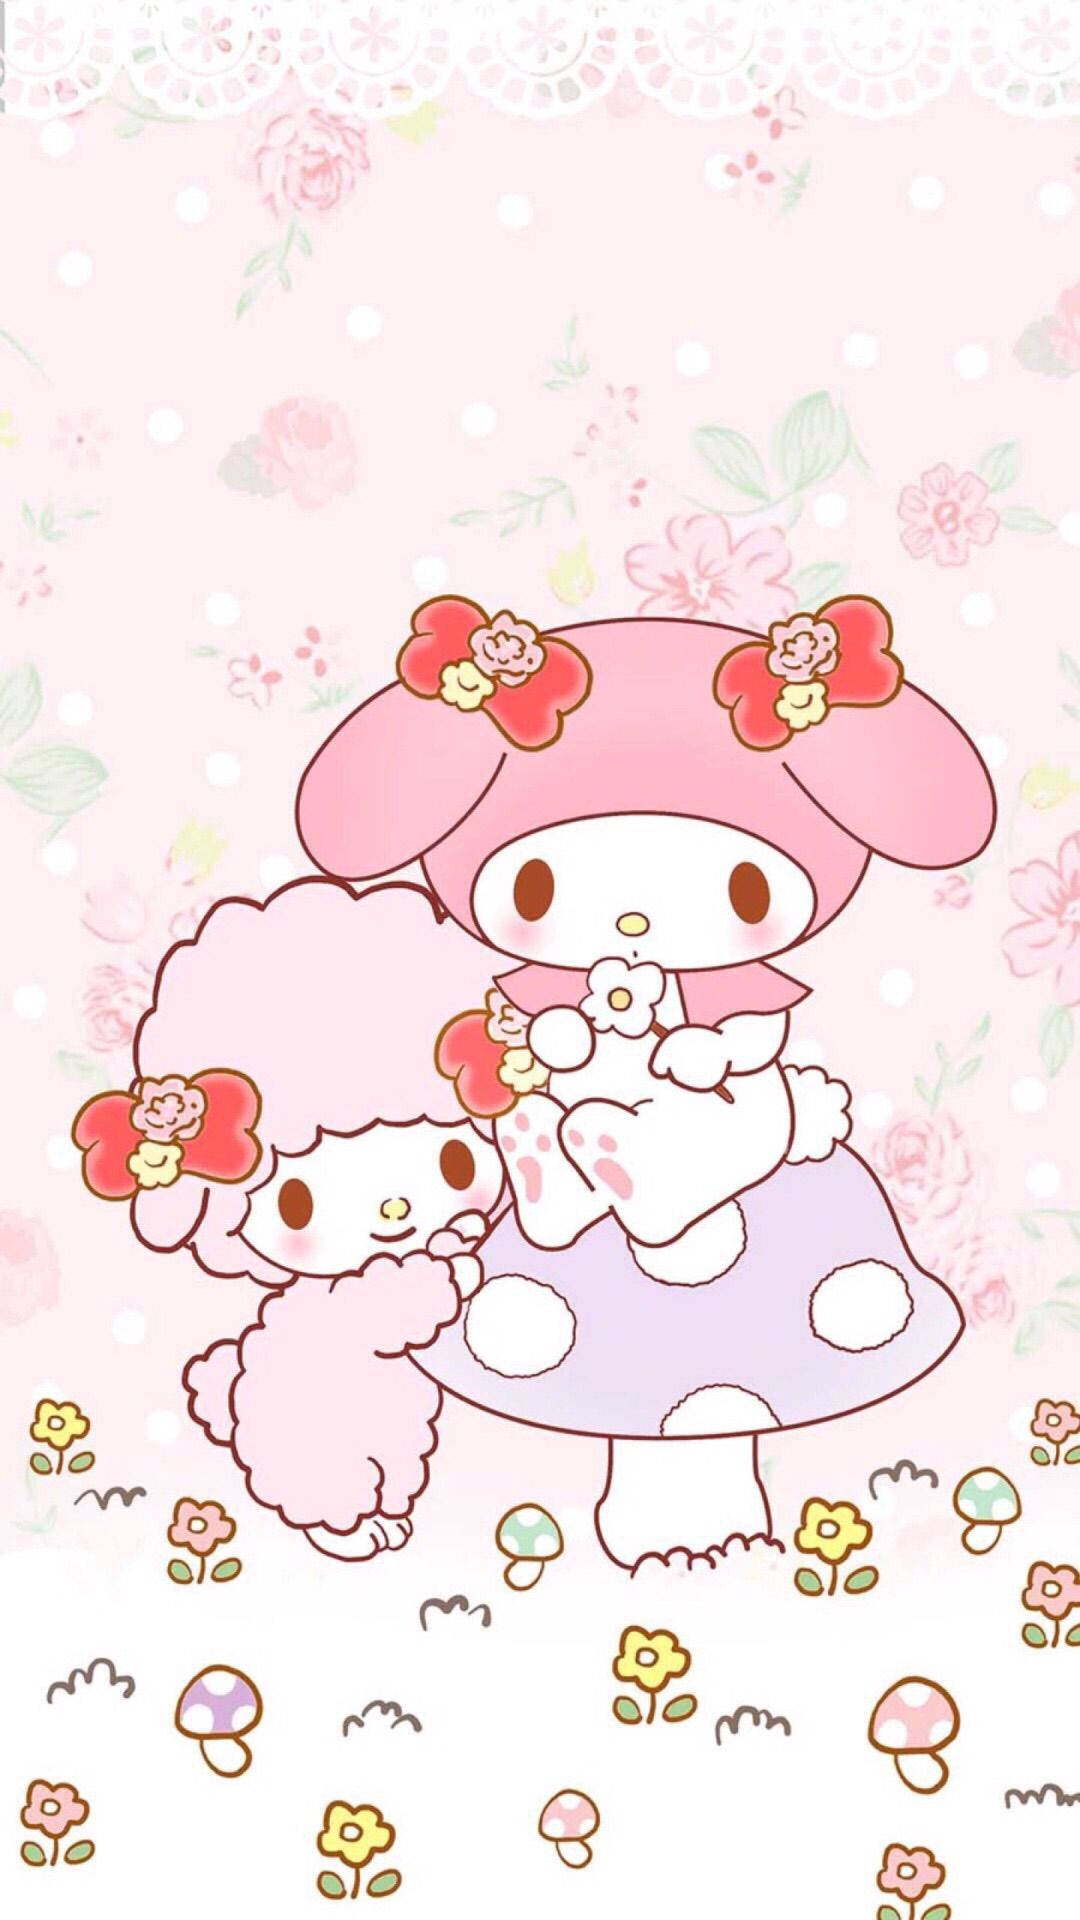 Free My Melody Wallpaper Downloads, [100+] My Melody Wallpapers for FREE |  Wallpapers.com